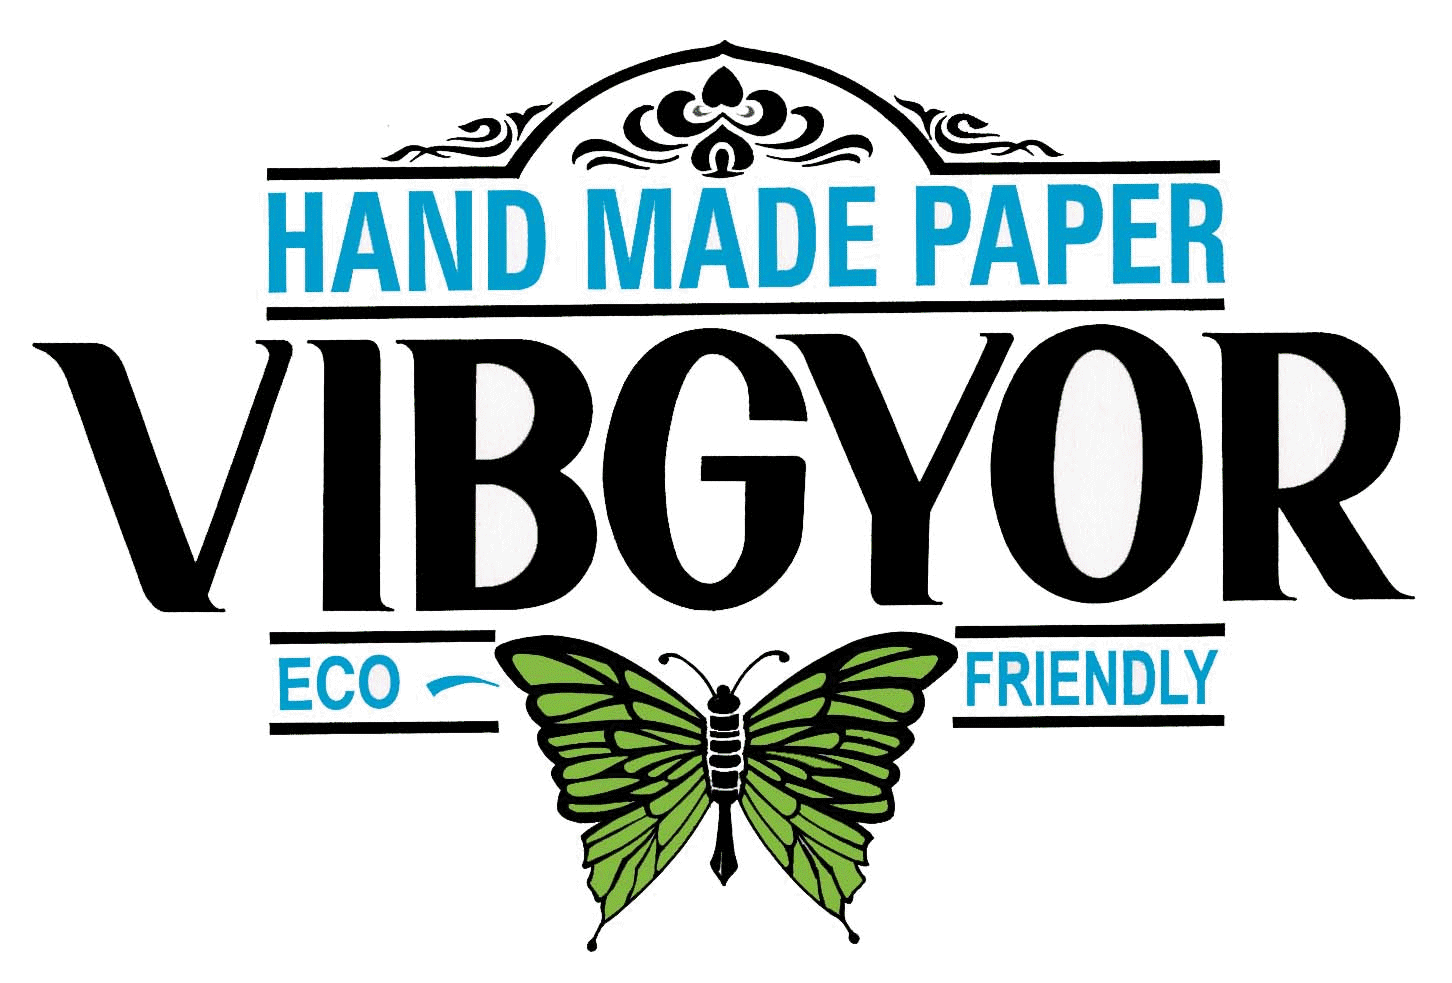 Welcome to the world of Vibgyor Handmade Paper Industries